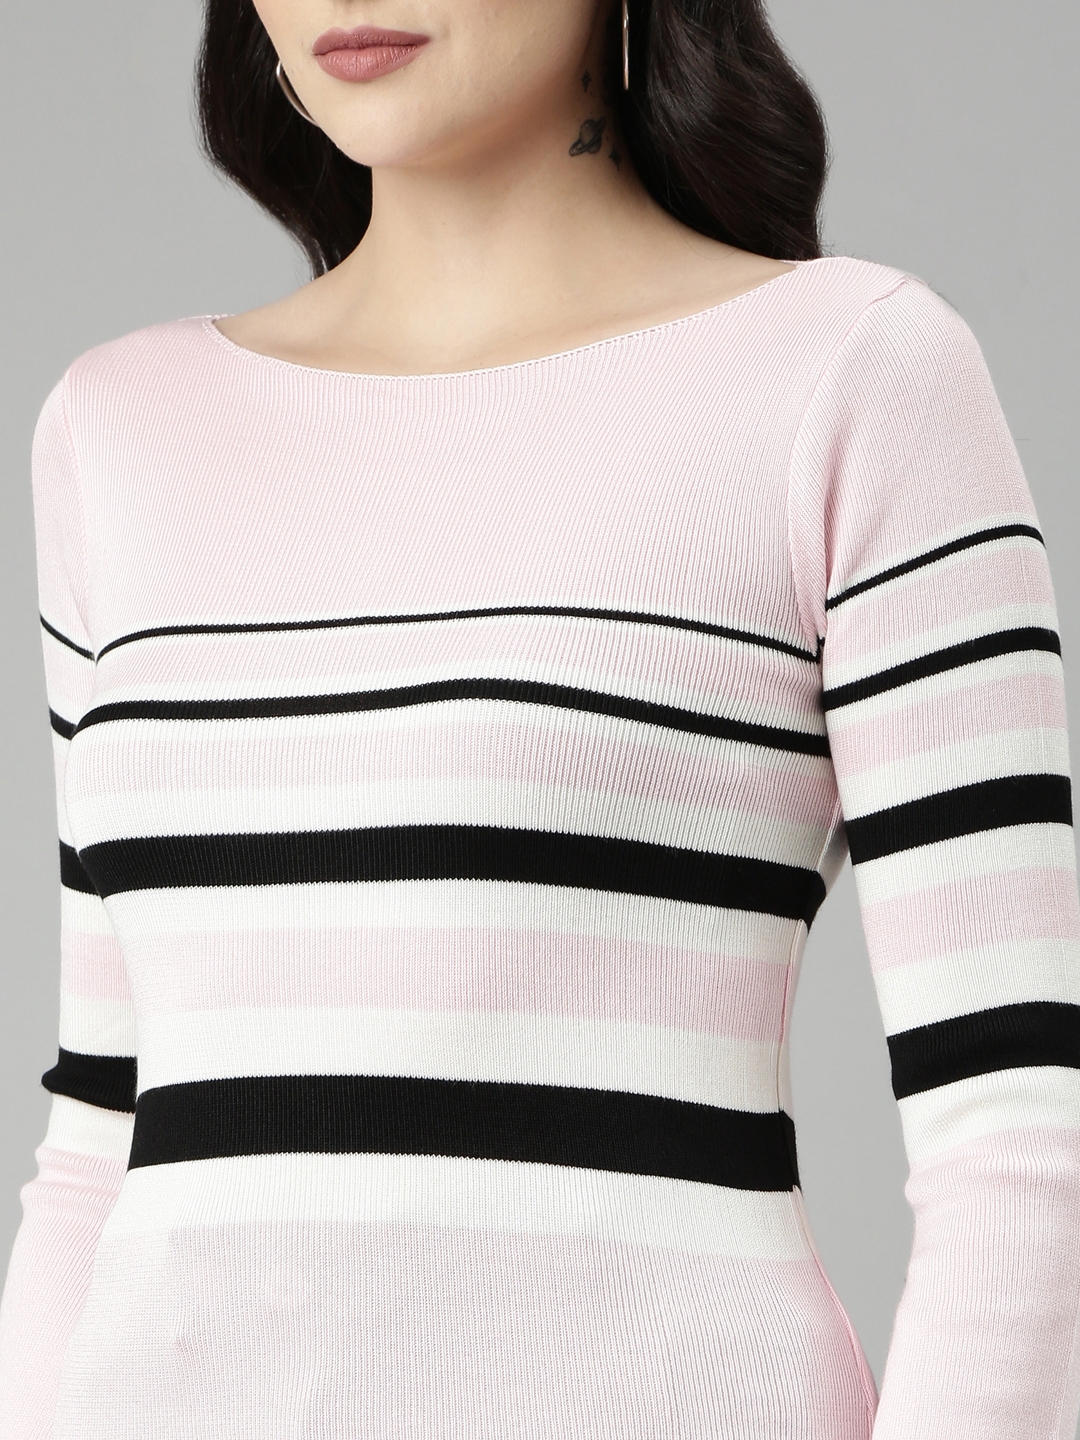 Showoff | SHOWOFF Women's Boat Neck Striped Bell Sleeves Fitted Pink Top 7